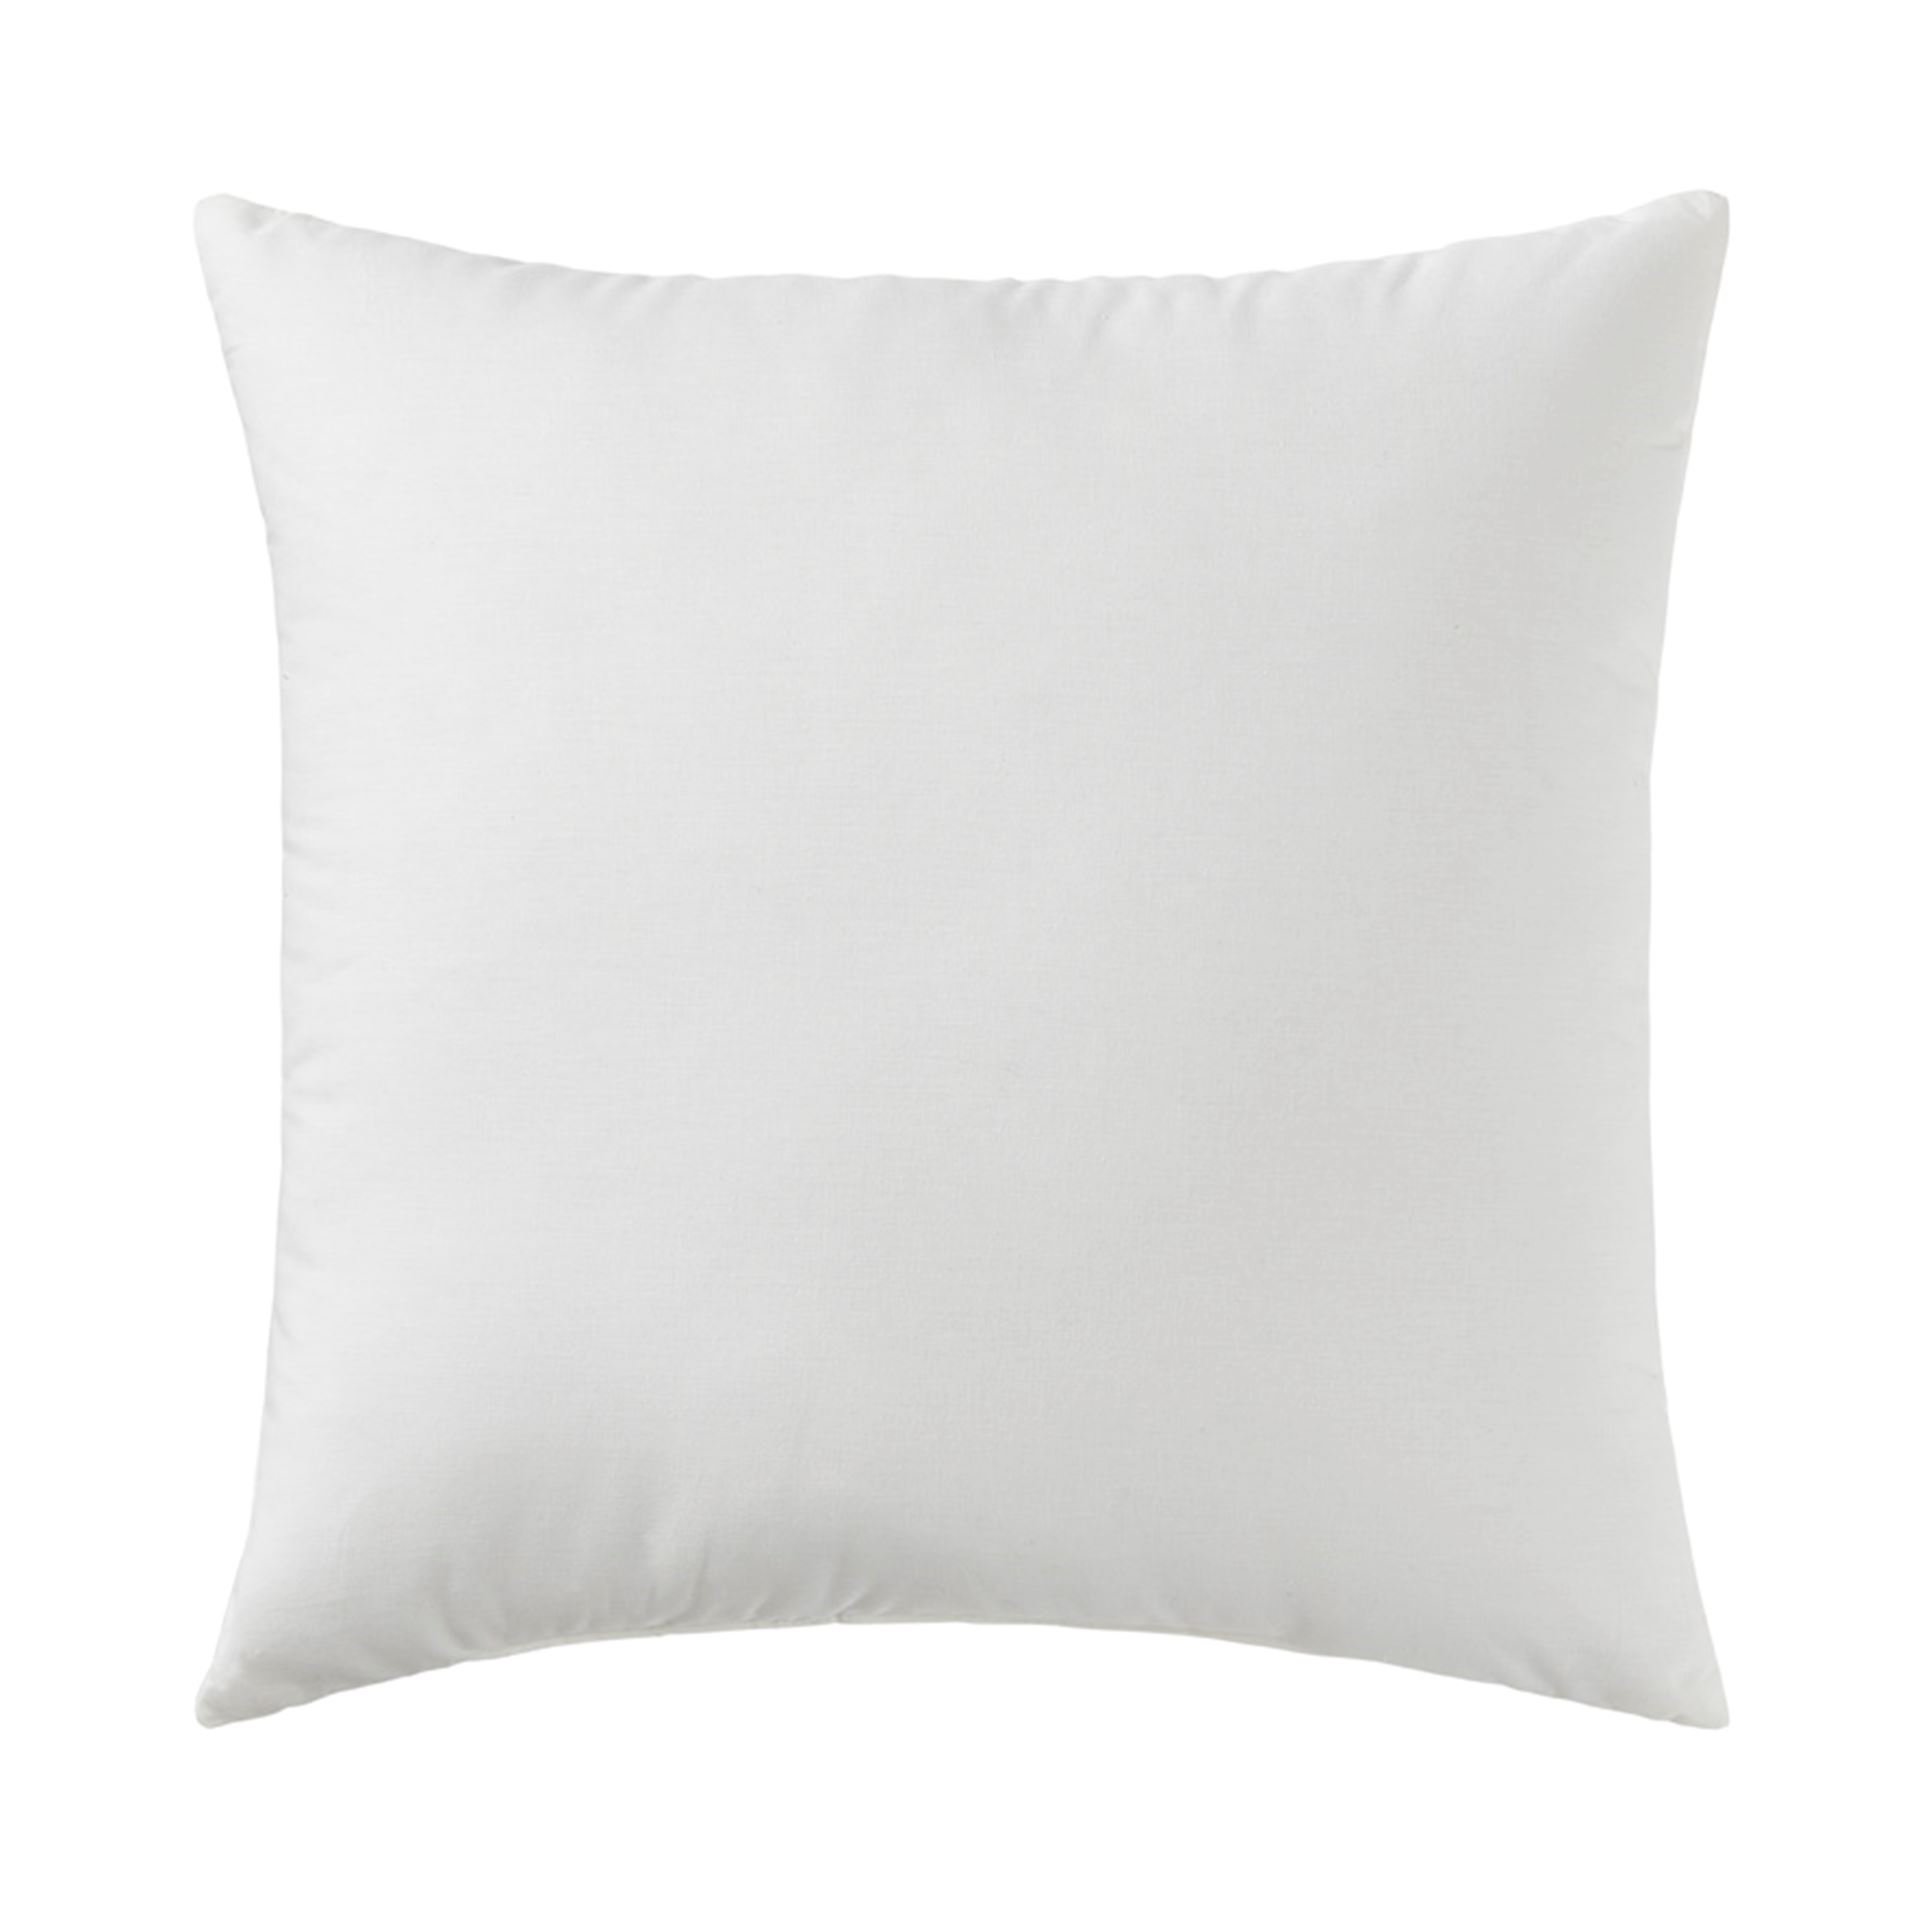 https://www.adairs.com.au/globalassets/13.-ecommerce/03.-product-images/2022_images/homewares/cushions/53921_45x45_01.jpg?width=1920&mode=crop&heightratio=1&quality=80